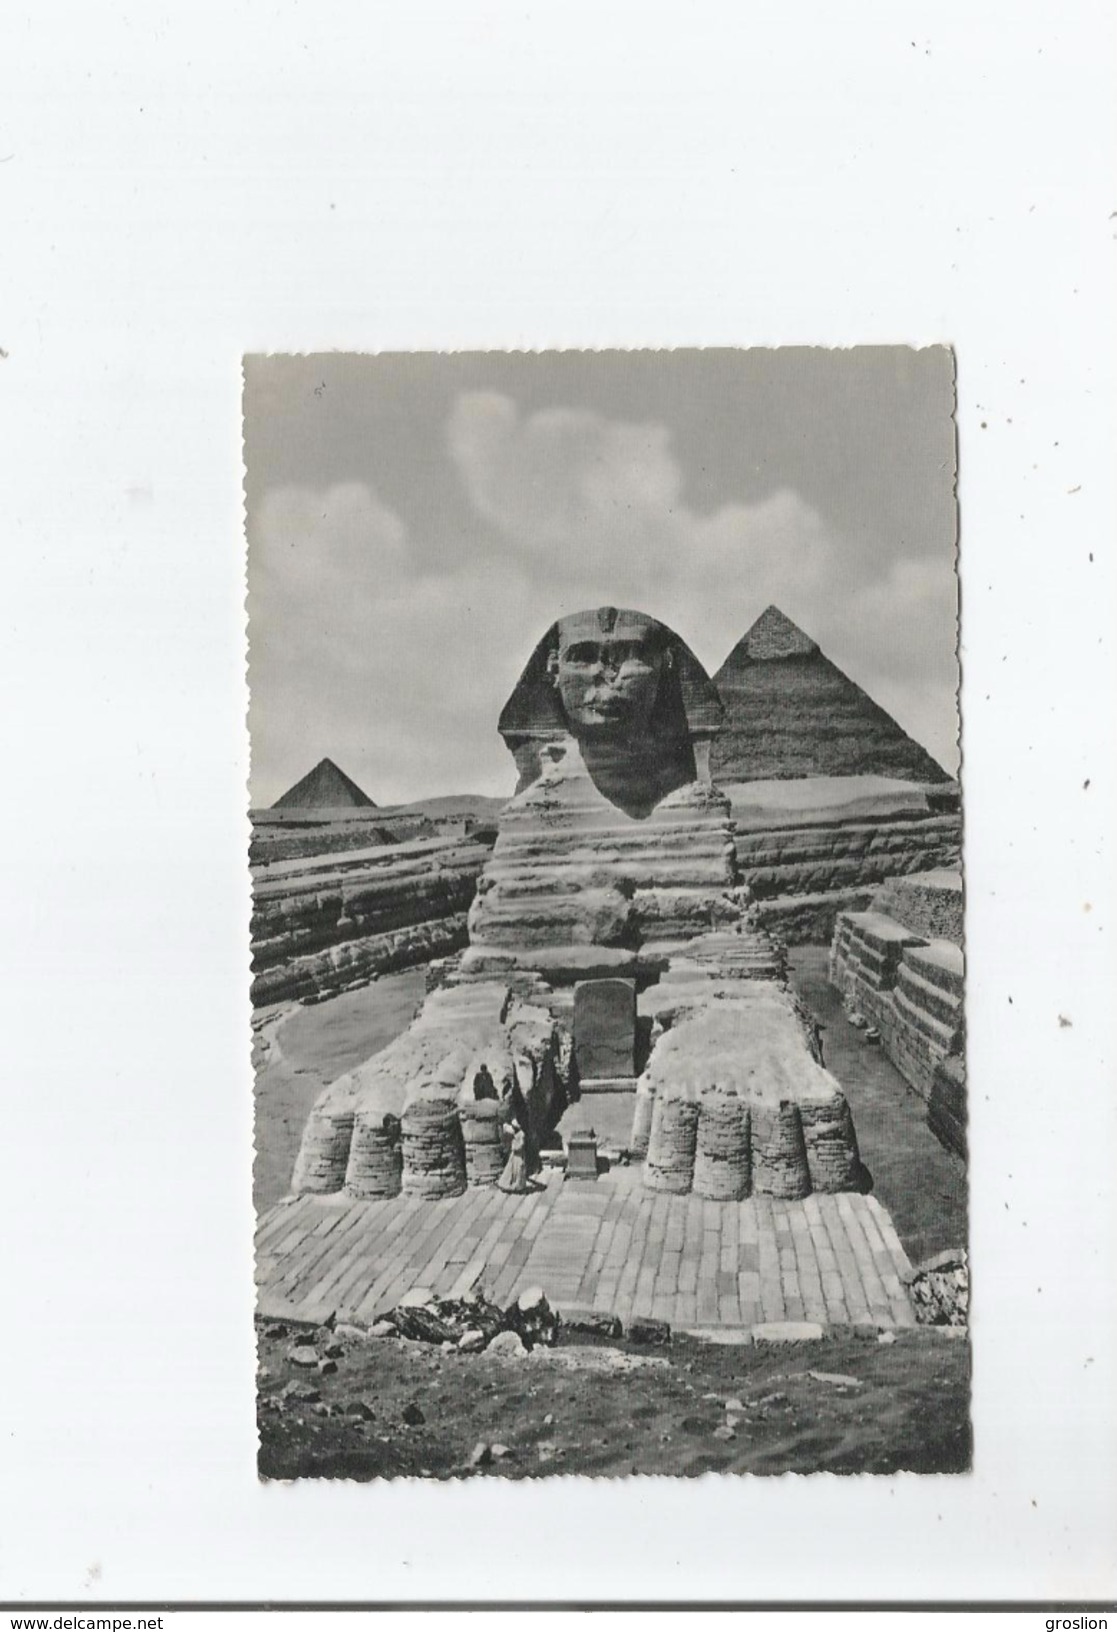 THE GREAT SPHINX OF GIZA 13 - Gizeh